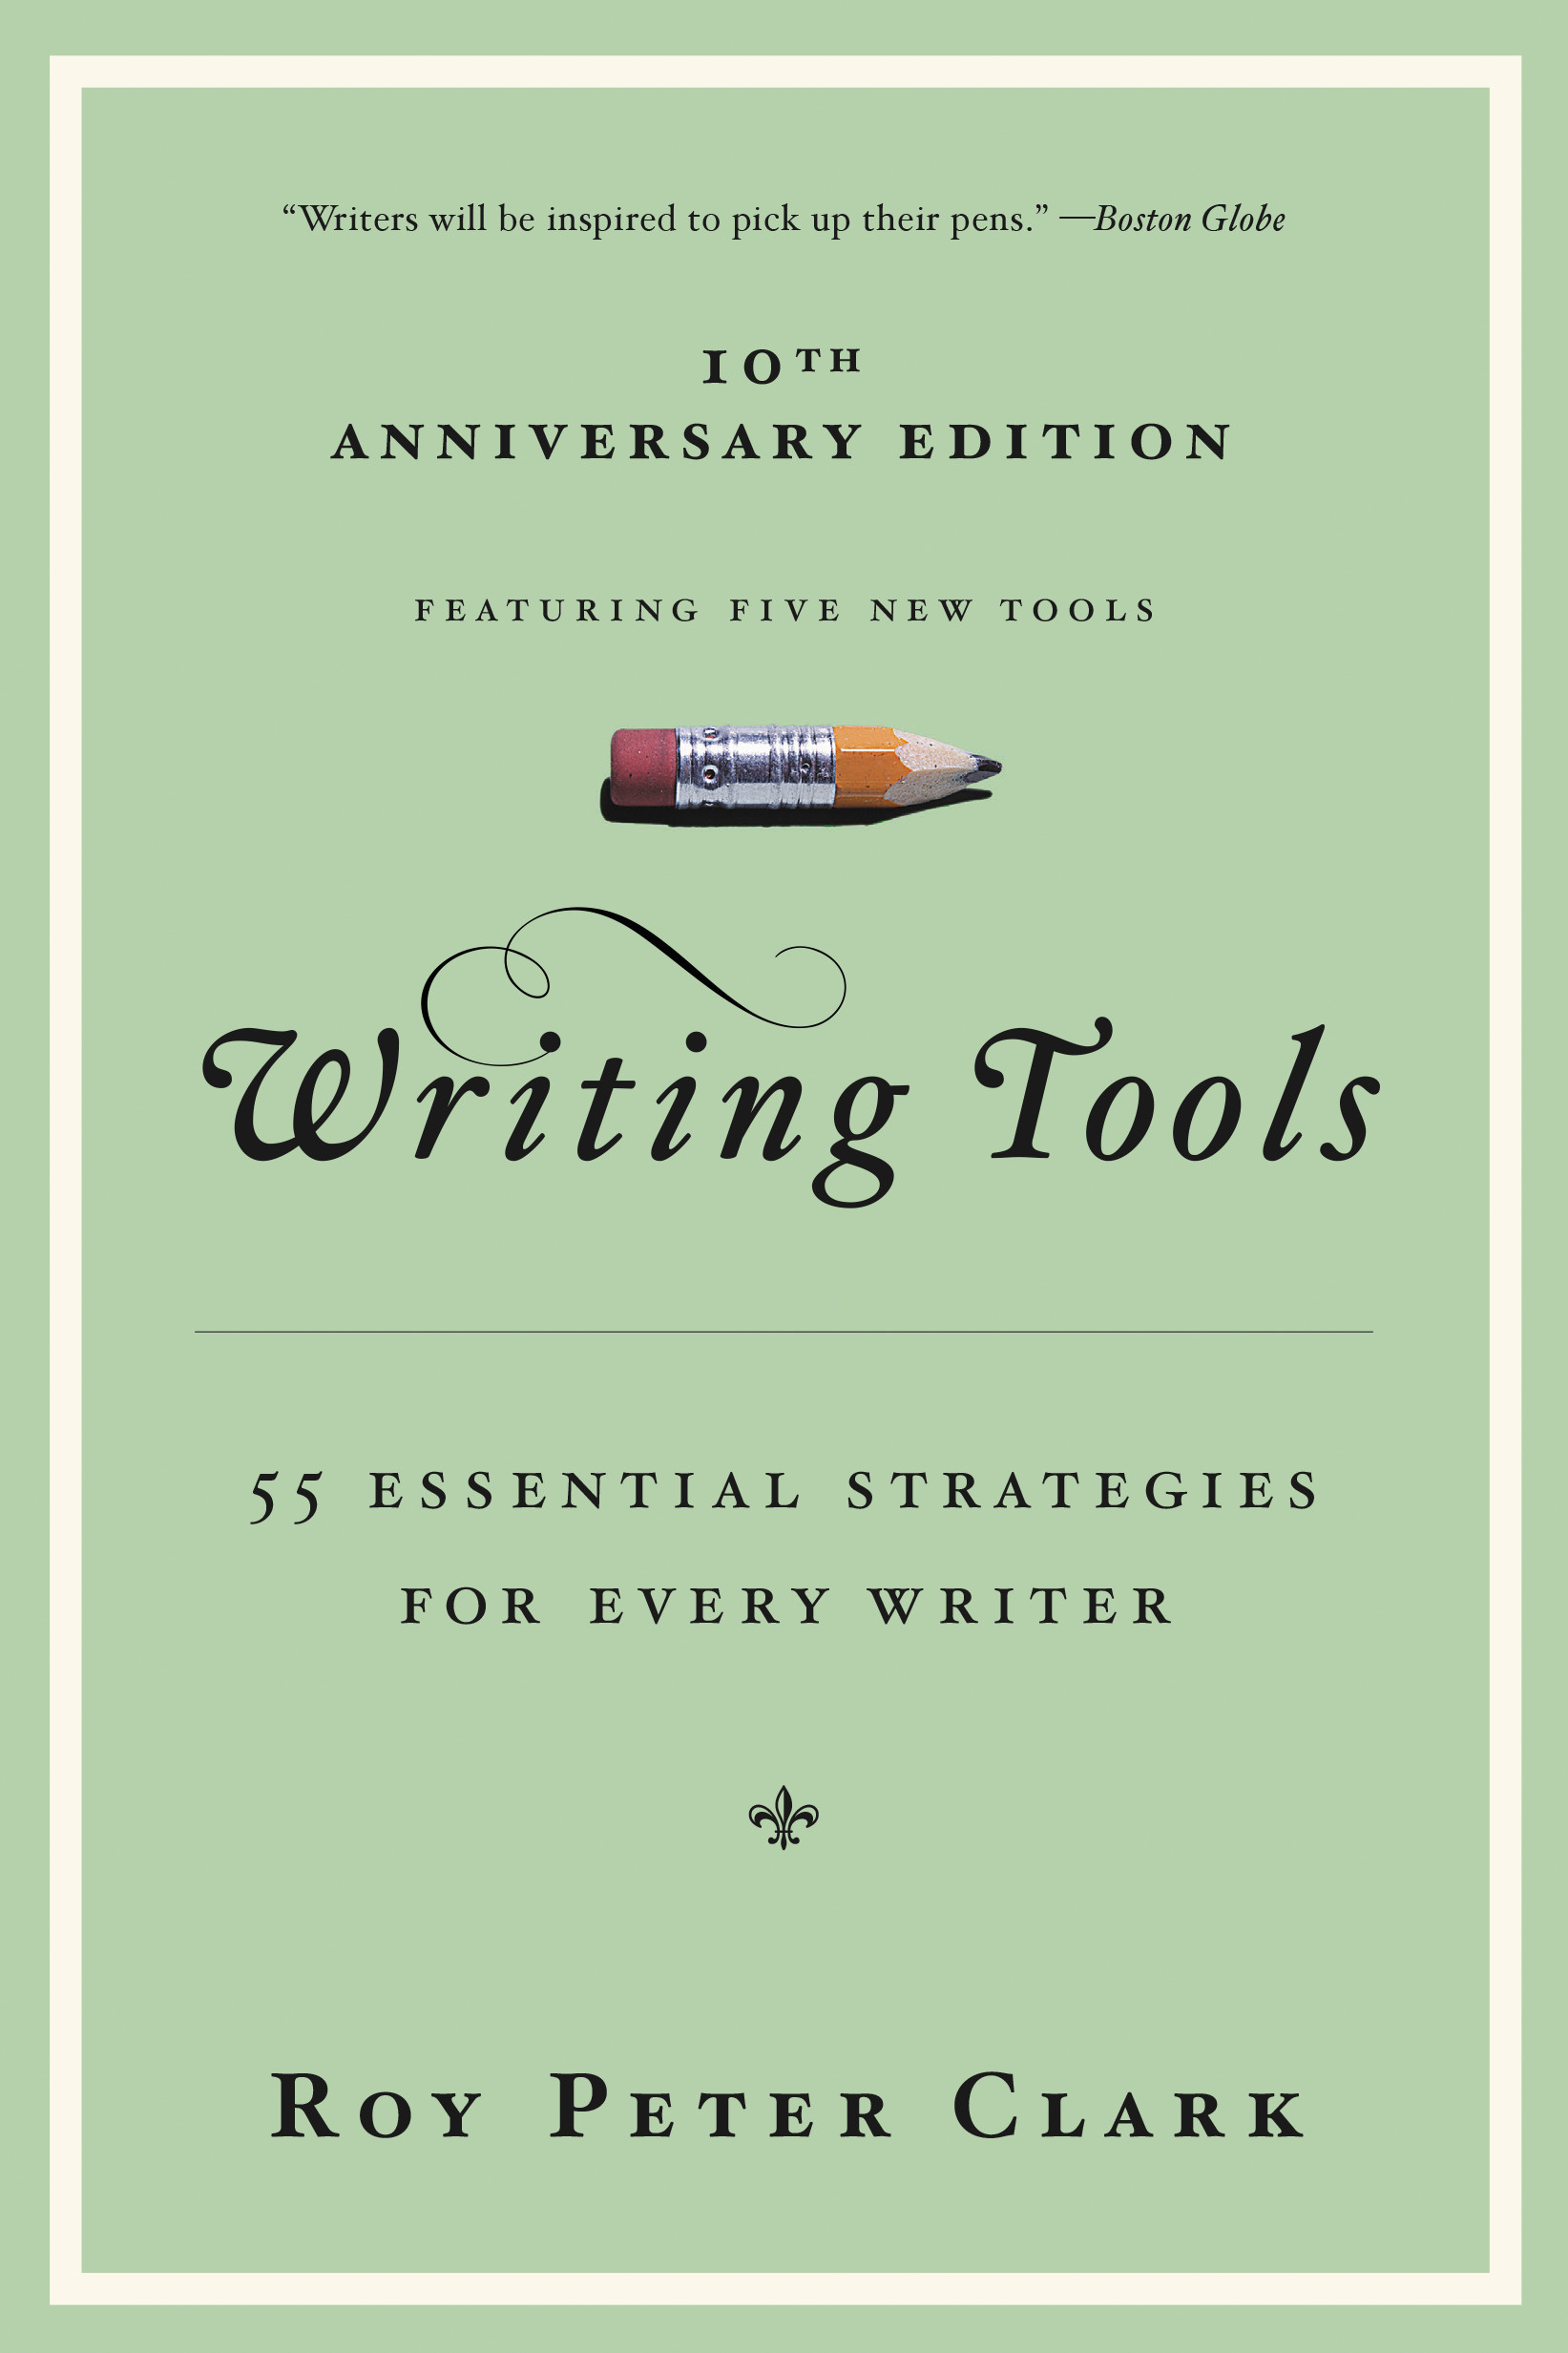 Tools　Writing　Book　Hachette　Clark　by　Peter　Roy　Group